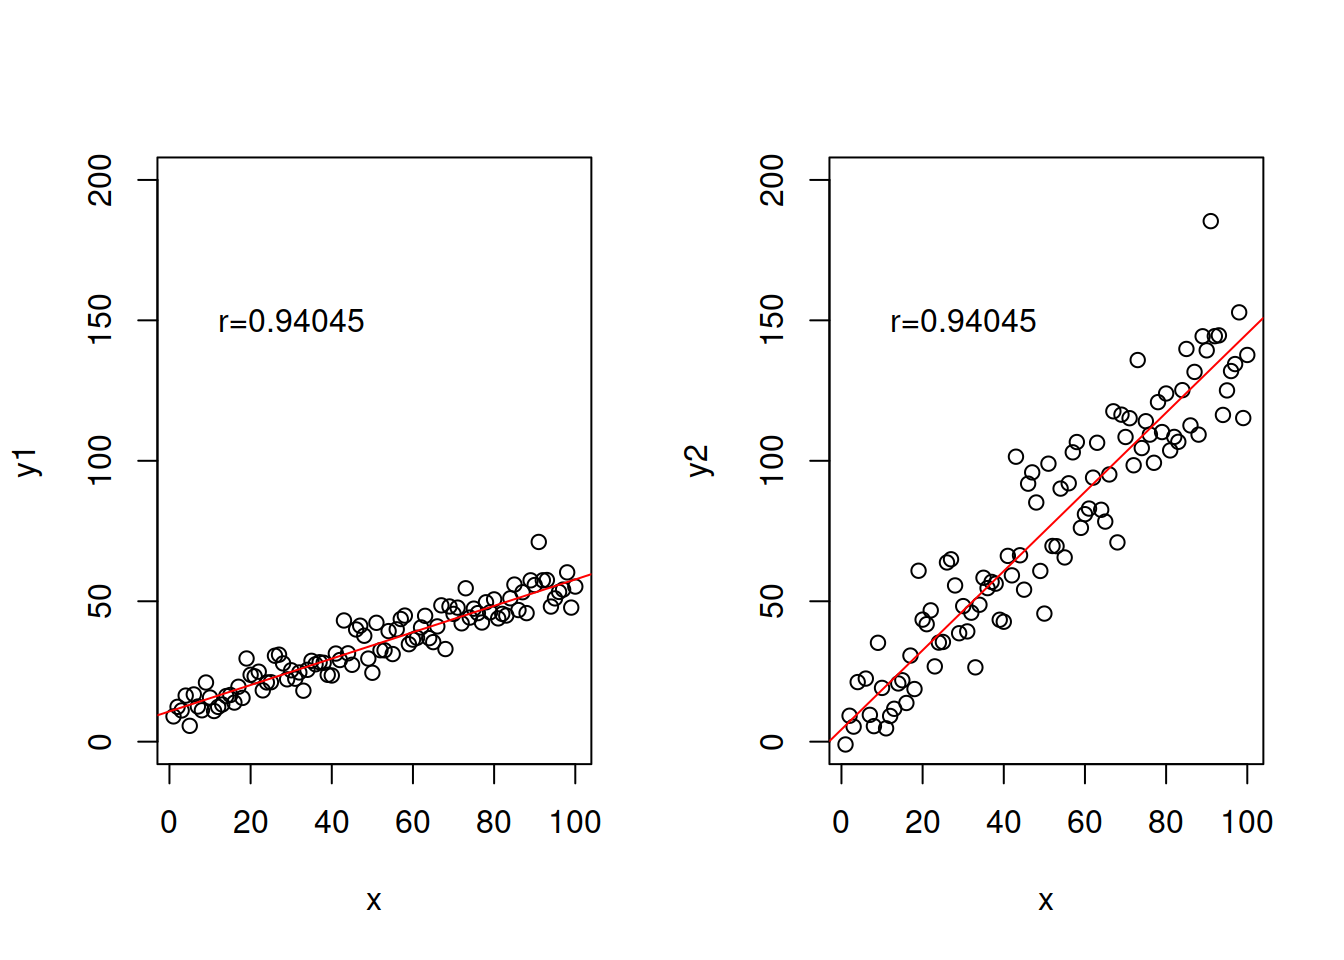 Example of relations with exactly the same correlations, but different slopes.